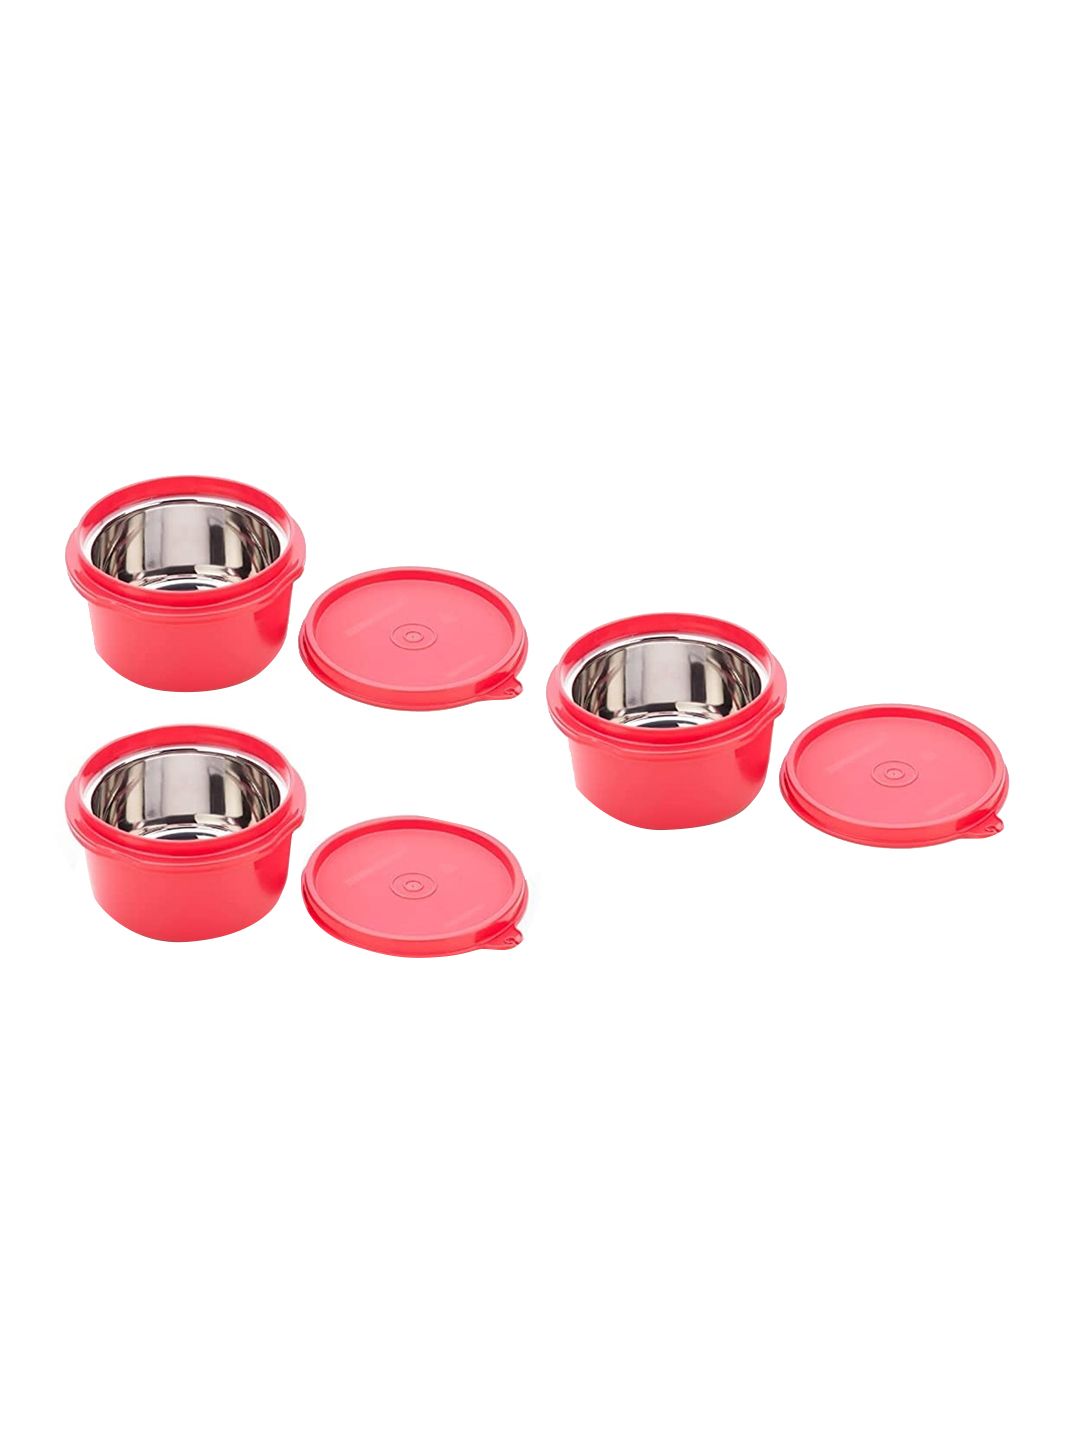 SignoraWare Set of 4 Red Solid Stainless Steel Leak Proof Storage Jars Price in India